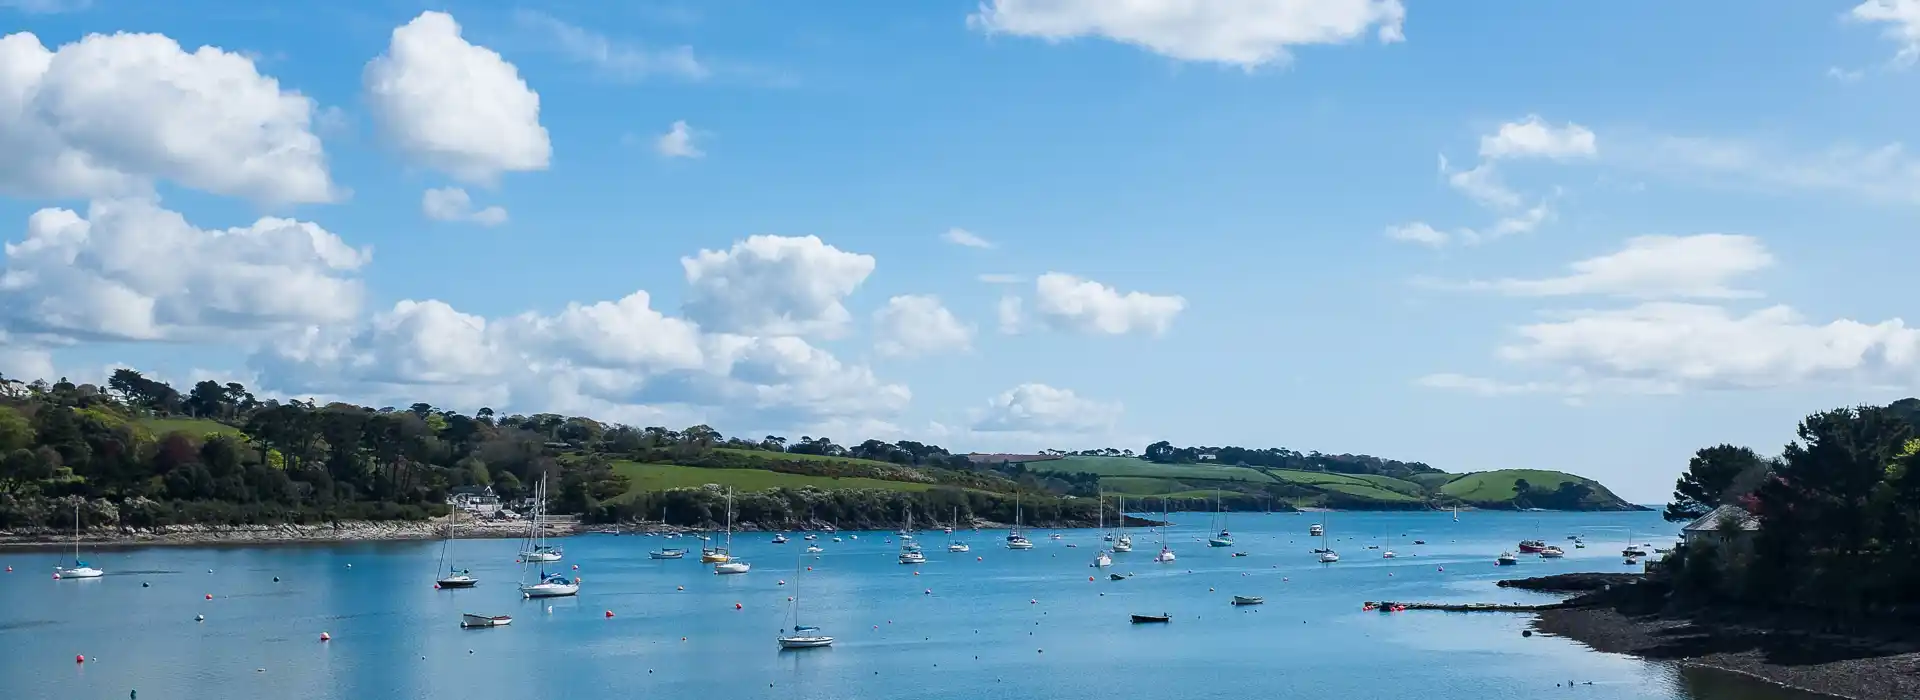 Campsites near the Helford River